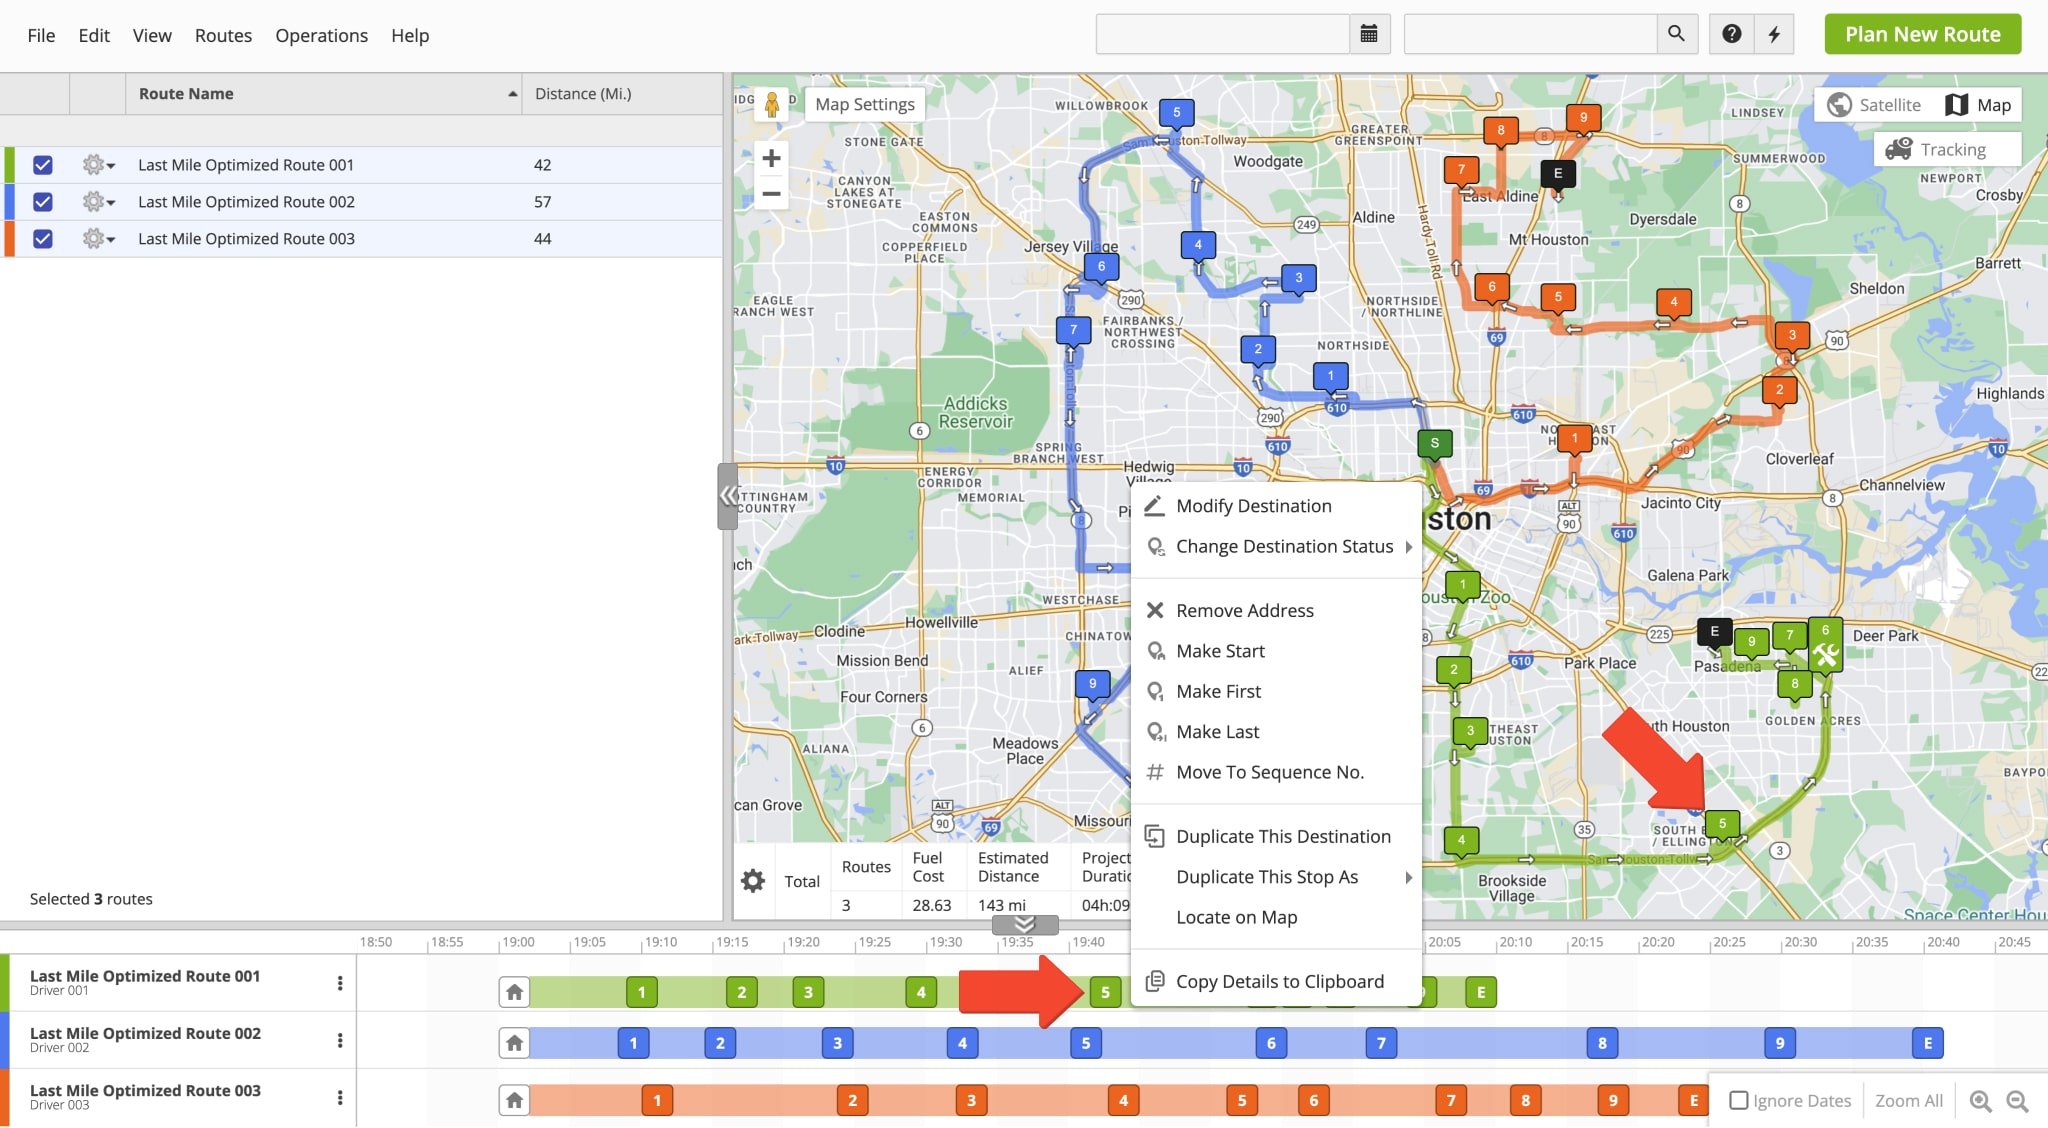 The Routes Map Time Line enables you to manage and move destinations within and between routes. To modify destinations, right-click the preferred destination on the Time Line or Interactive Map.